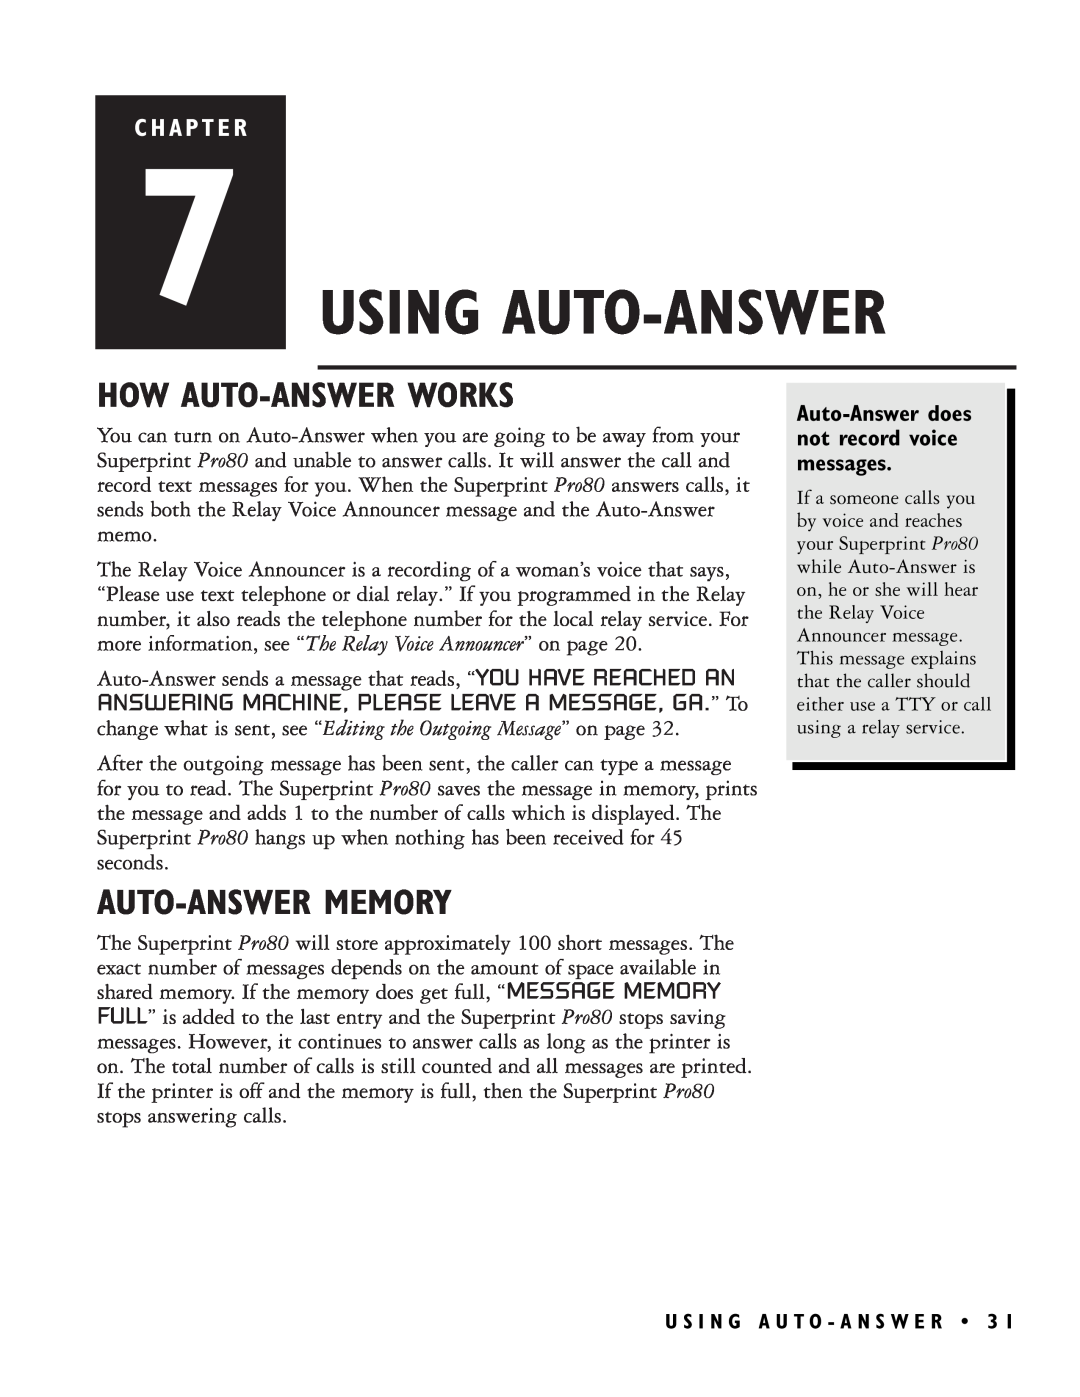 Ultratec PRO80TM Using Auto-Answer, How Auto-Answer Works, Auto-Answer Memory, Auto-Answer does not record voice messages 